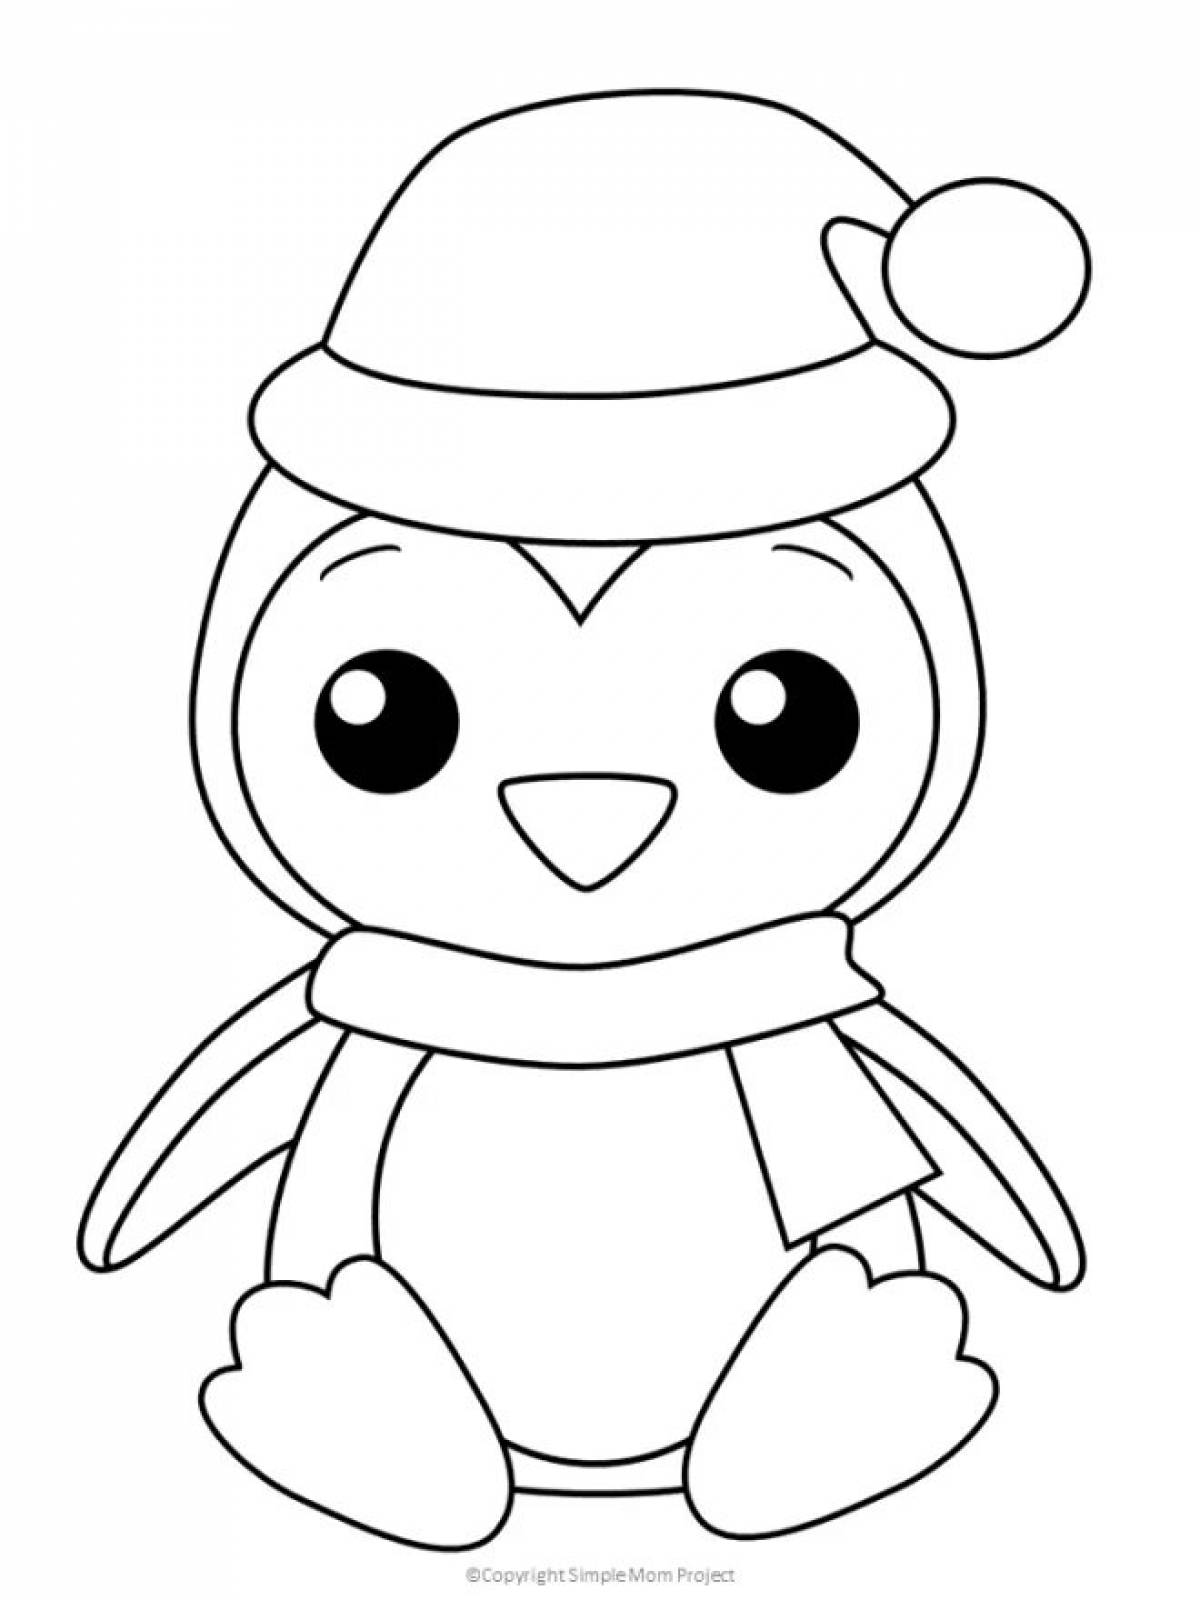 Adorable penguin coloring pages for kids